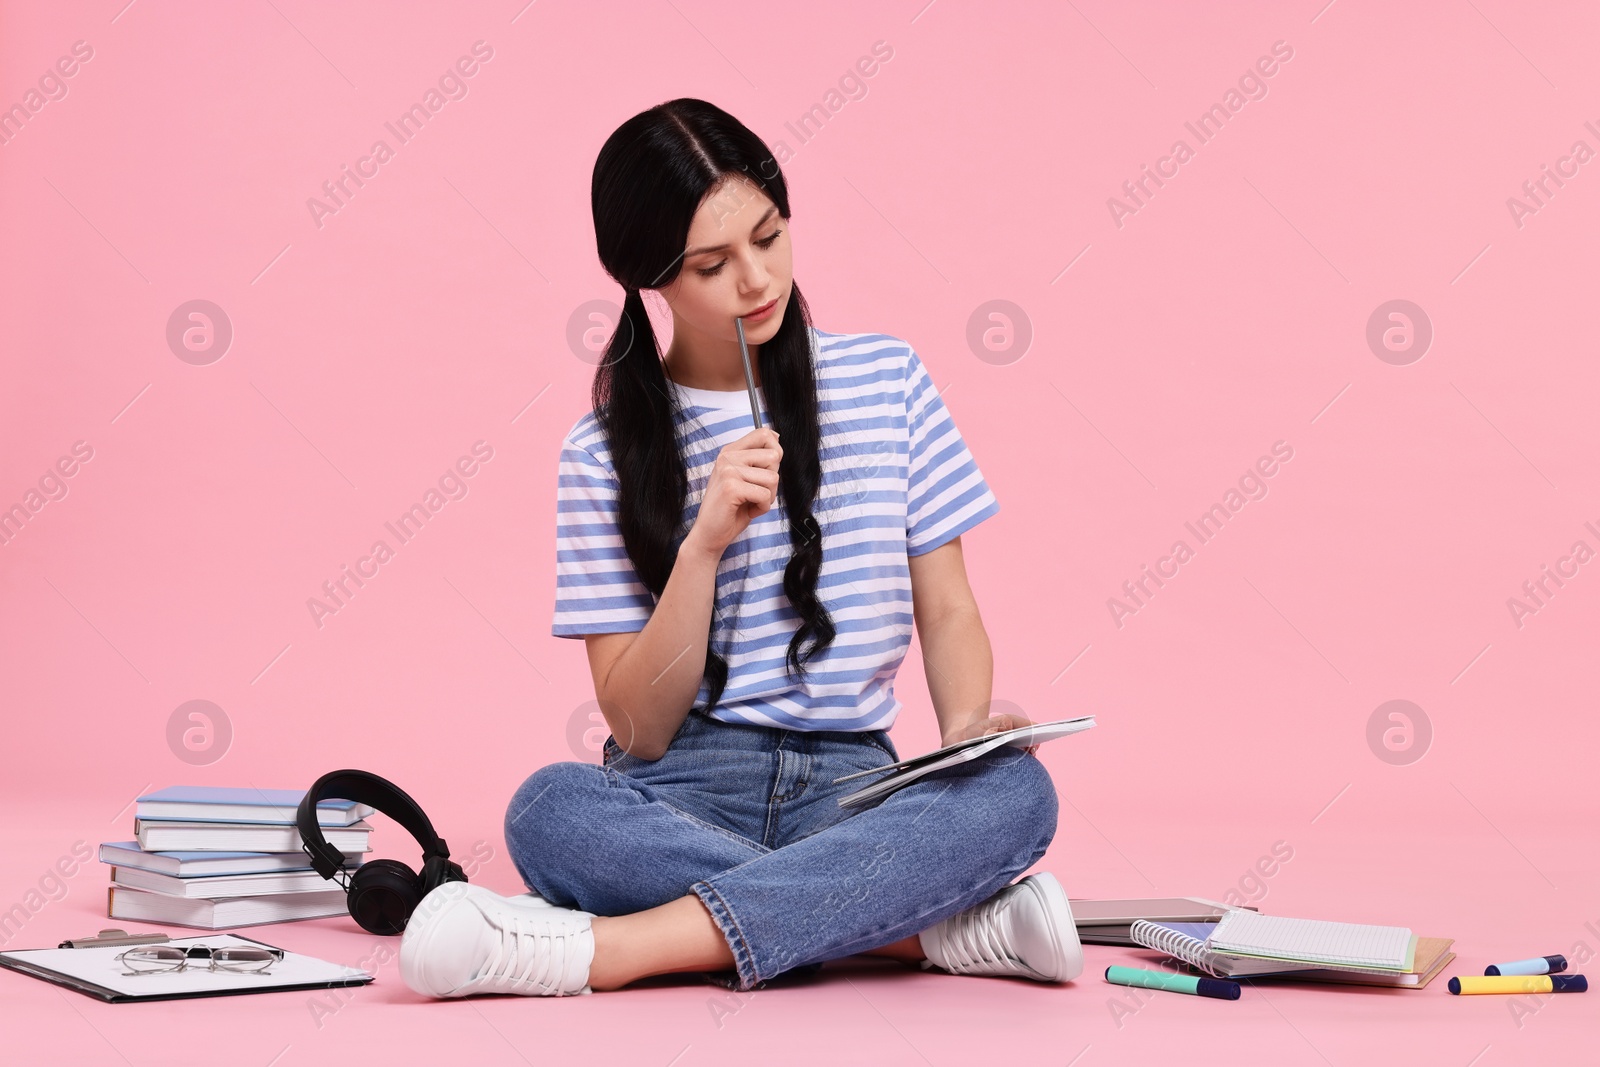 Photo of Student with notebook sitting among books and stationery on pink background